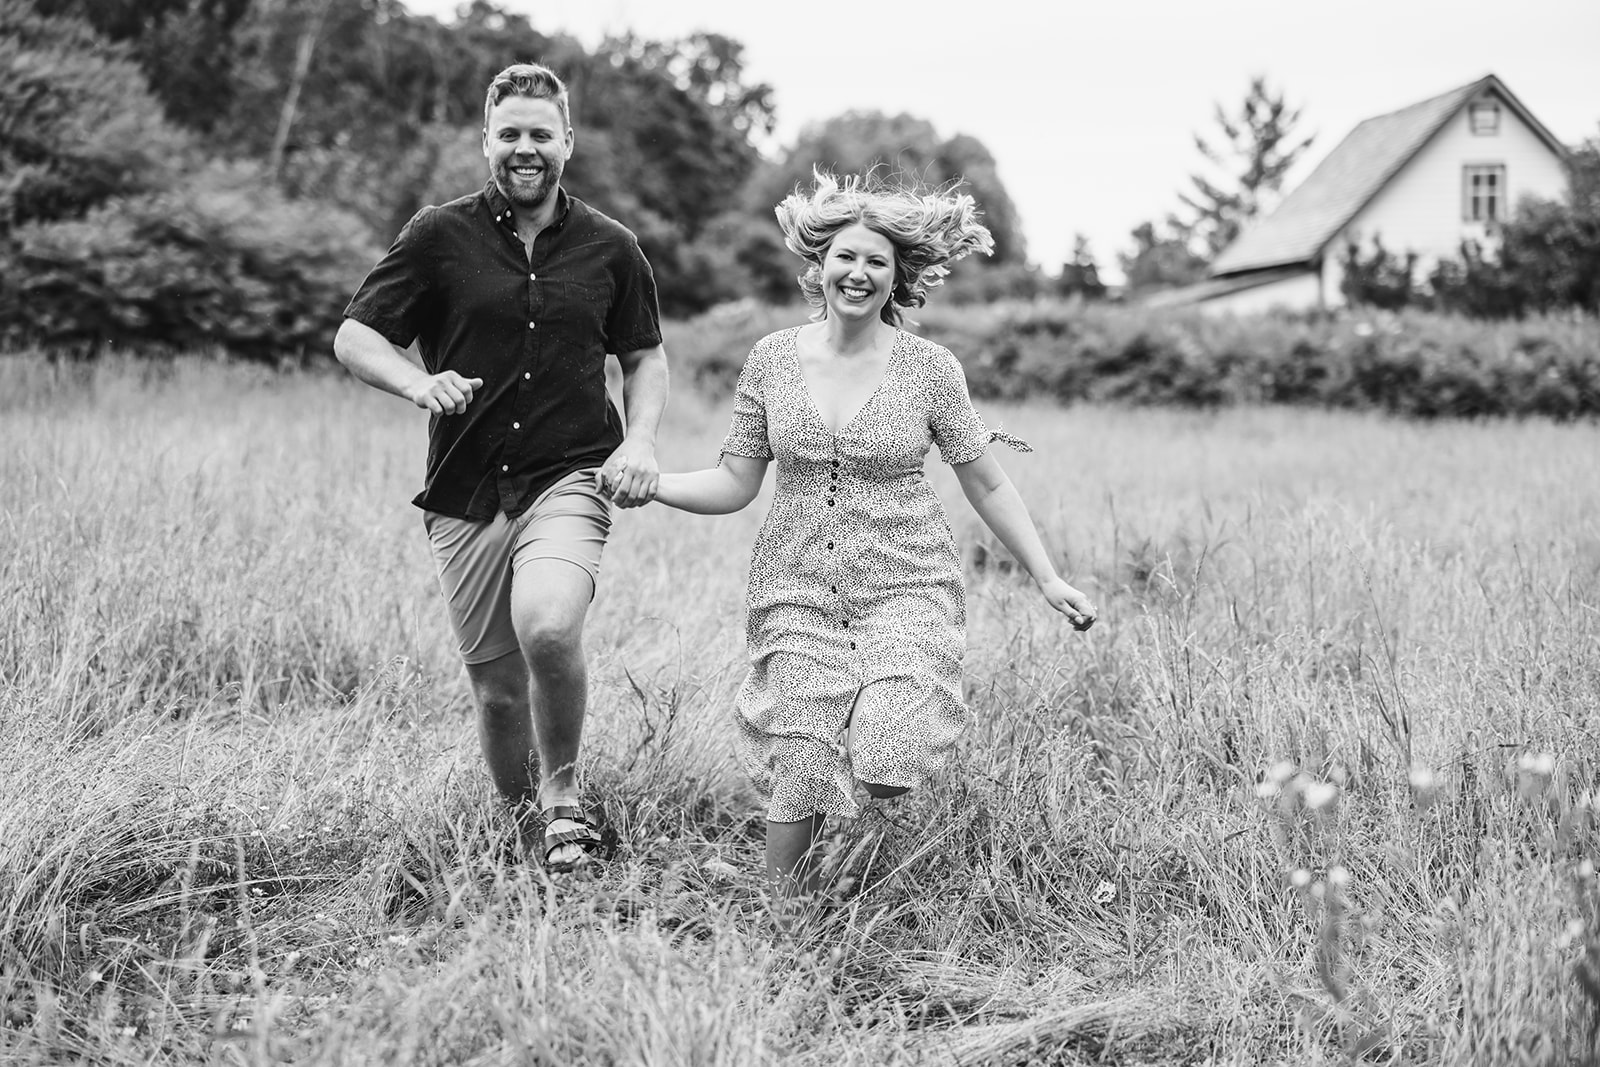 Candid engagement photos in a picturesque field setting